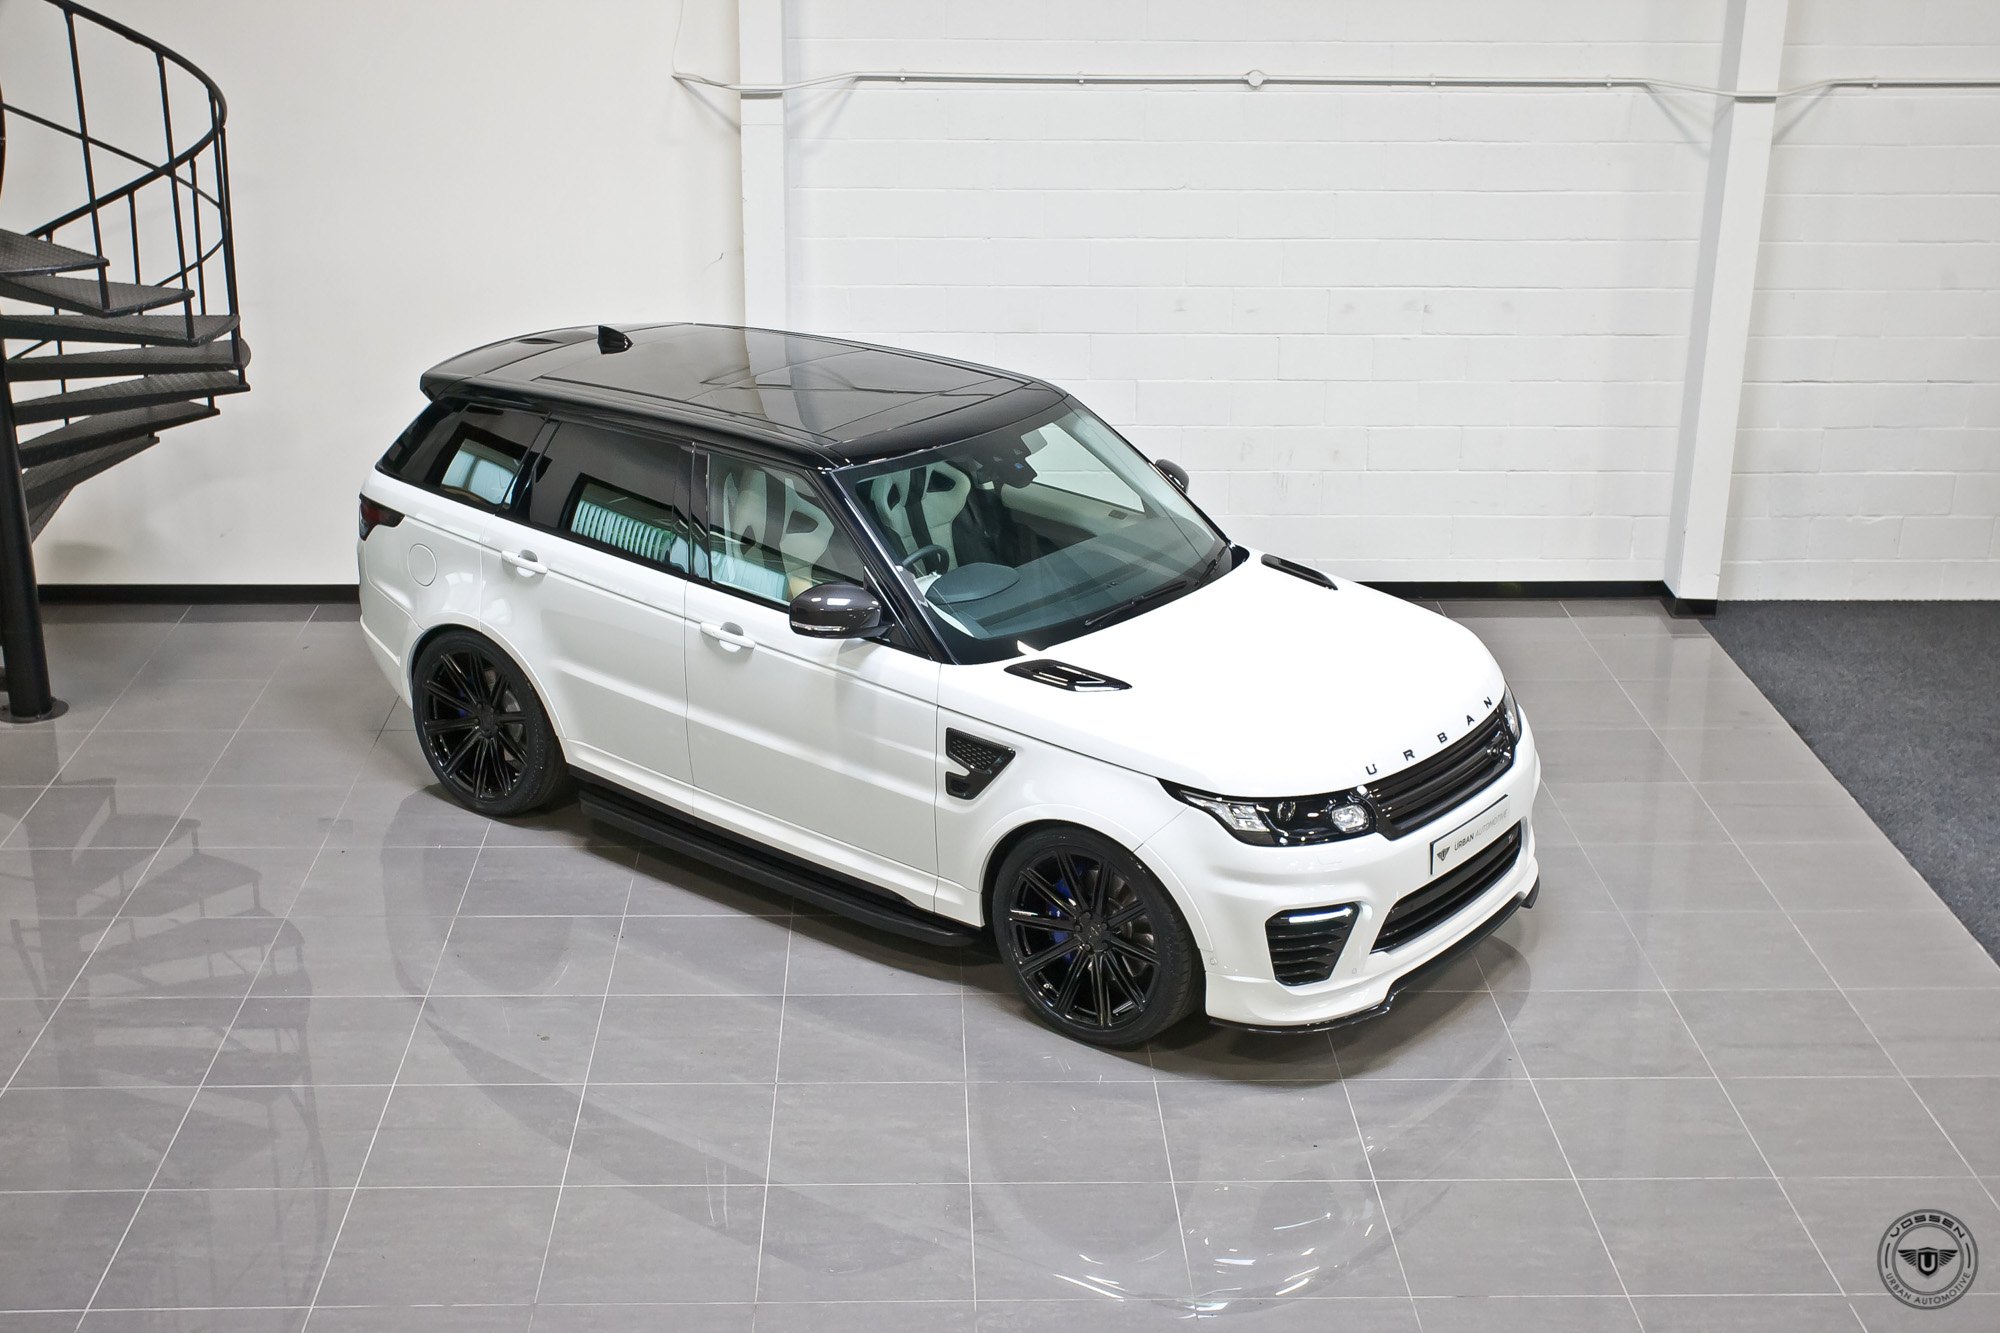 Custom Hood with Air Vents on White Range Rover Sport - Photo by Vossen